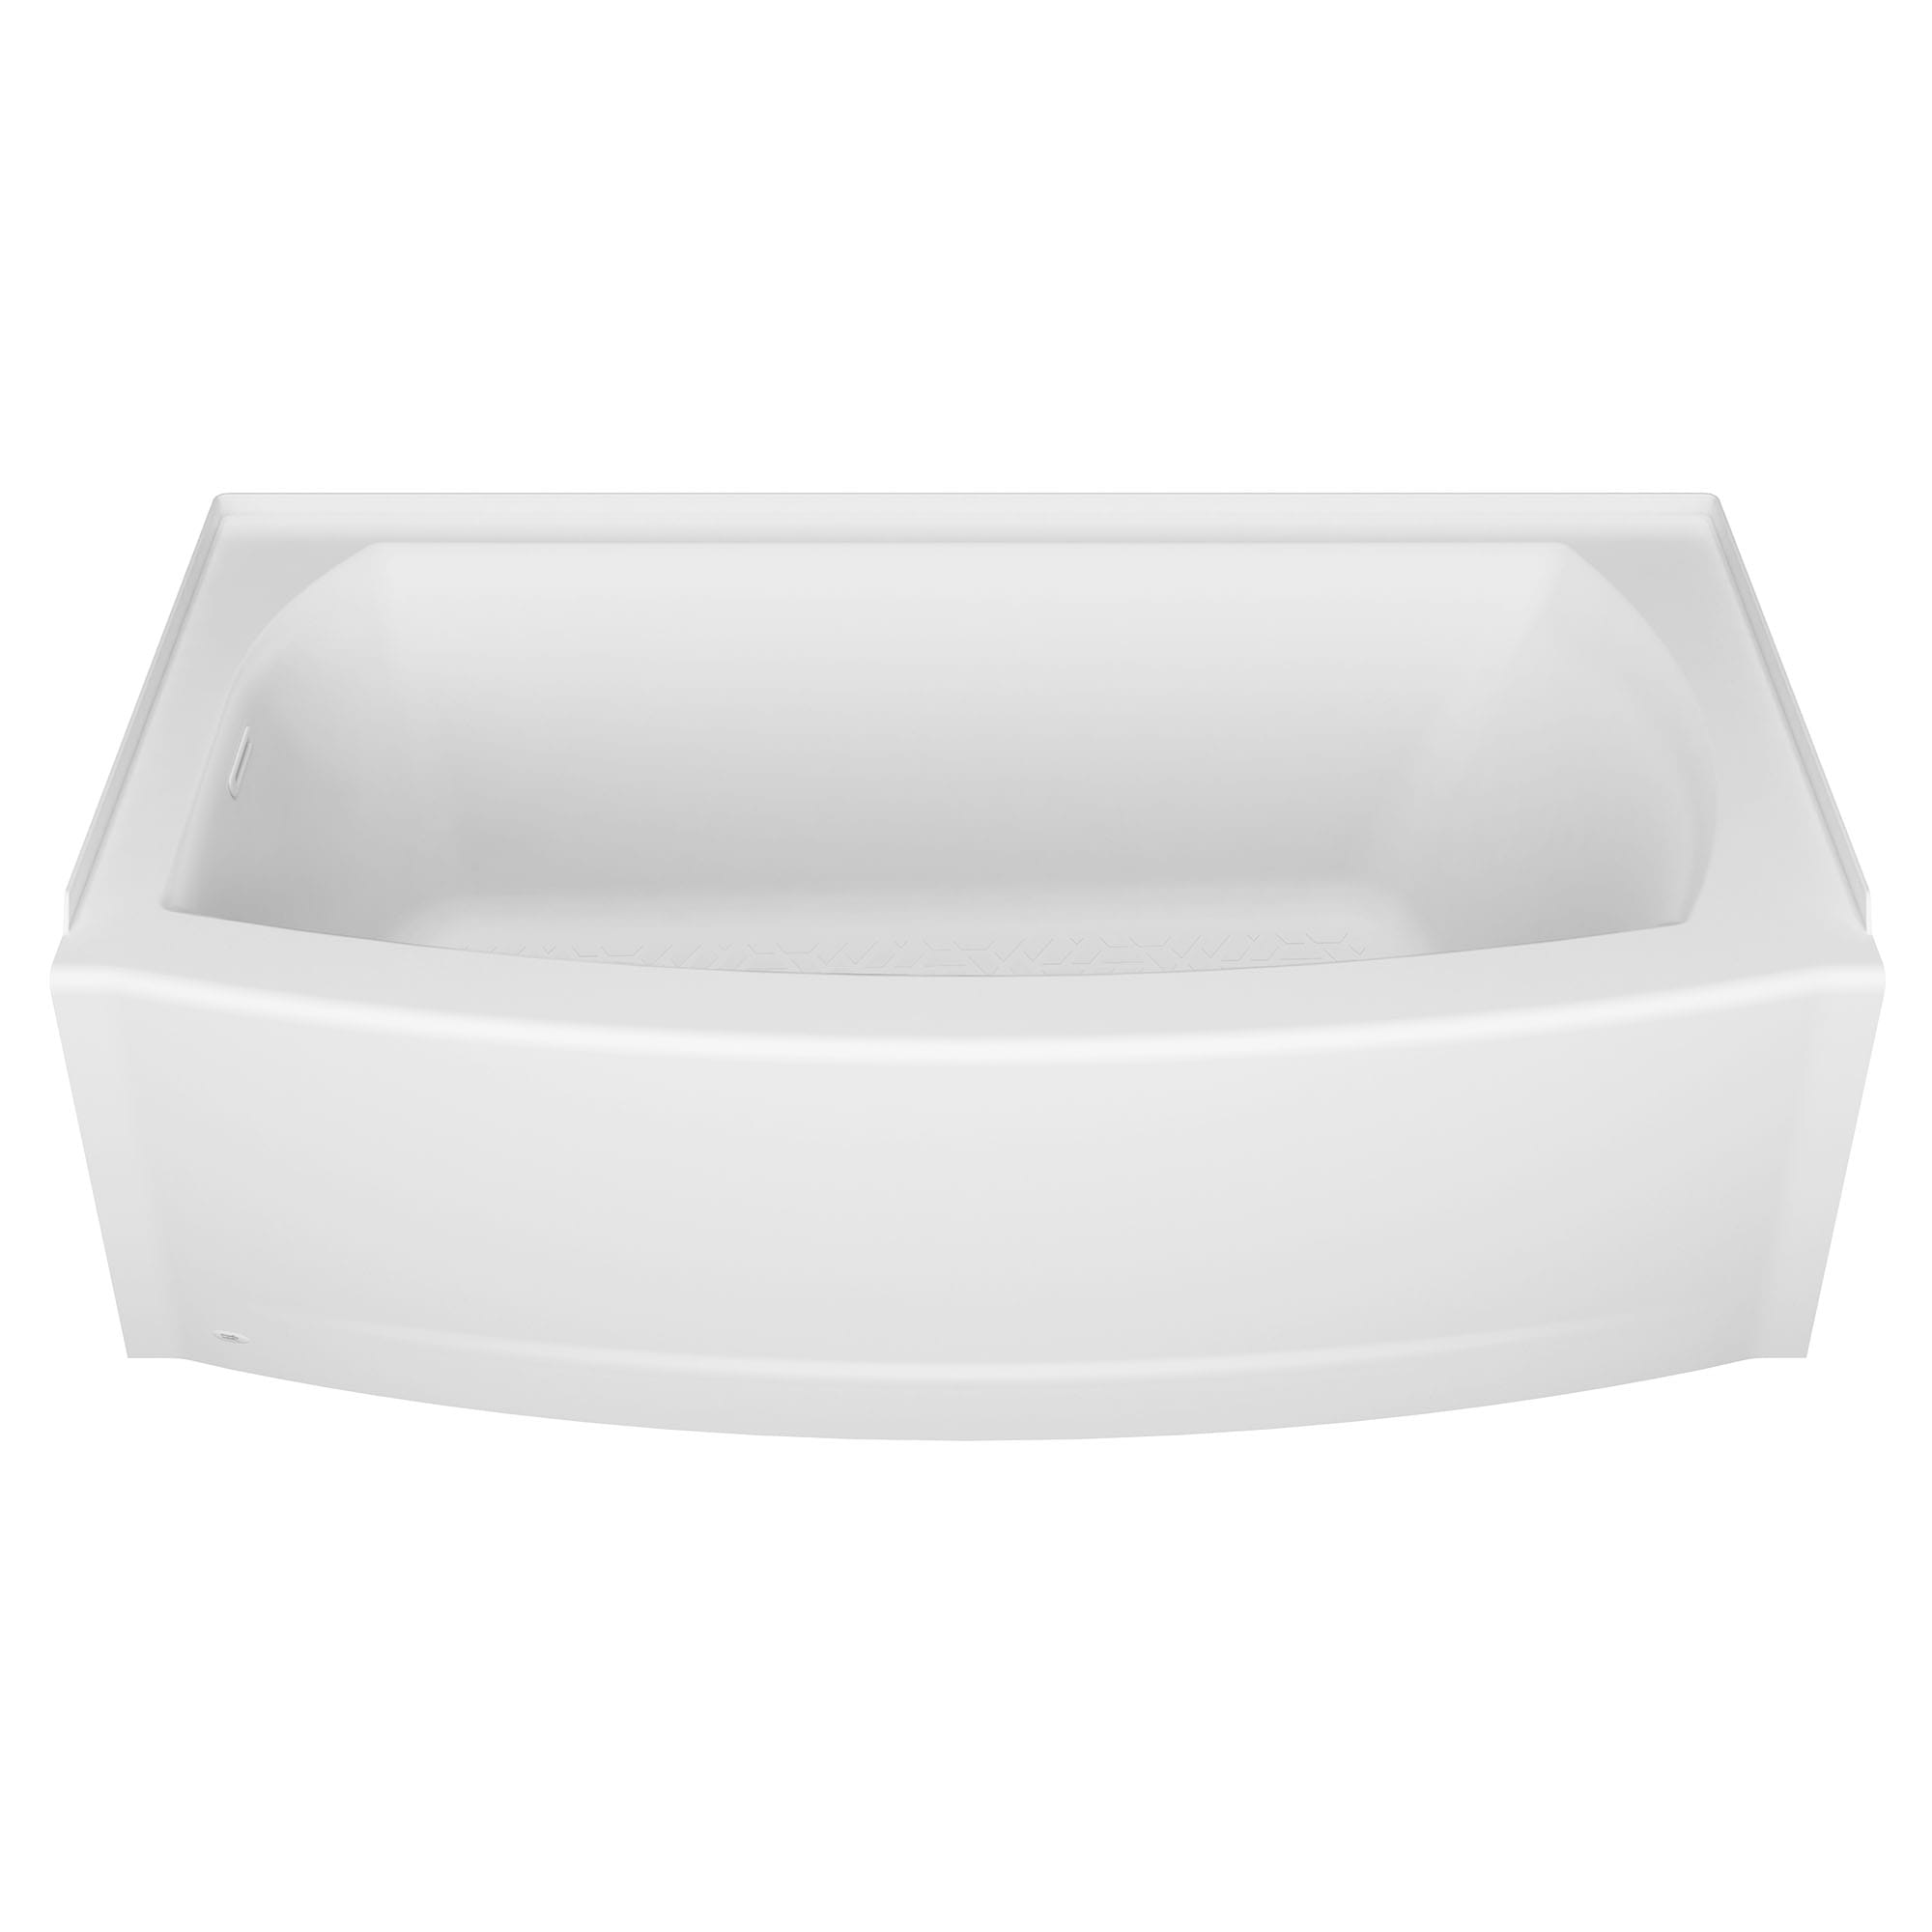 Ovation Curve™ 5x30-inch Integral Apron Bathtub with Left-hand Outlet with Deep Soak Drain